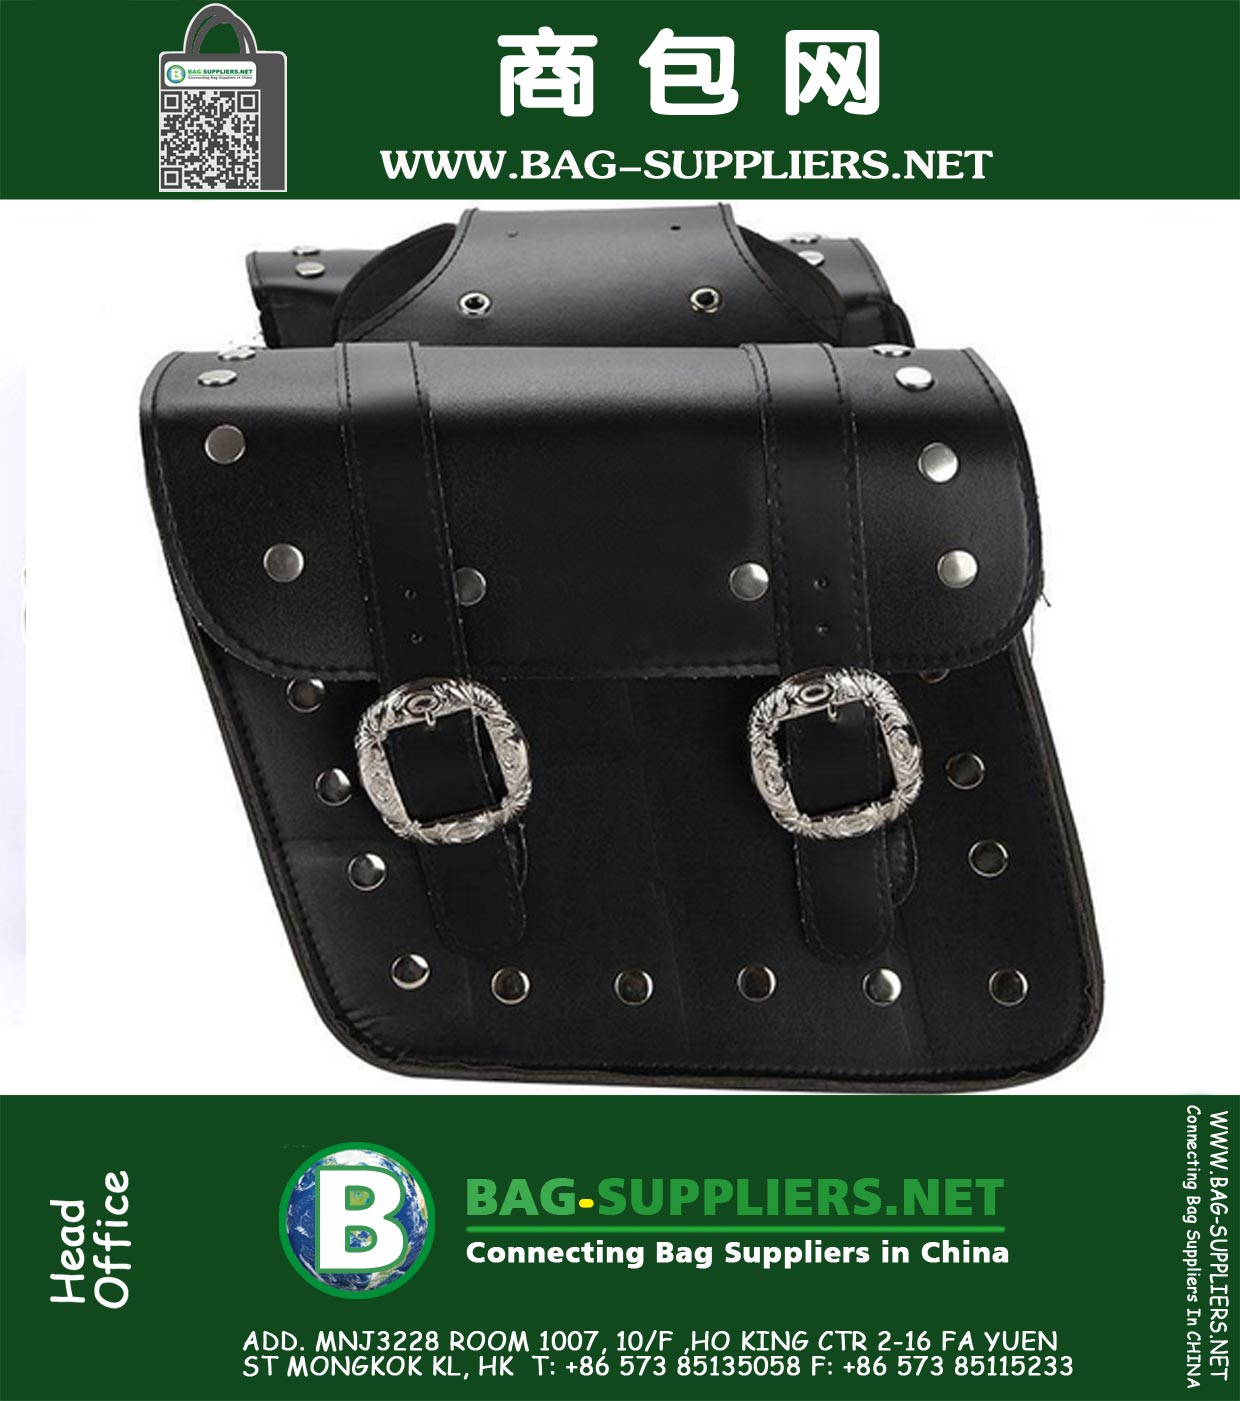 Color: Black Material: PU leather,metal buckles Dimension(each): approx 310mm(12.25